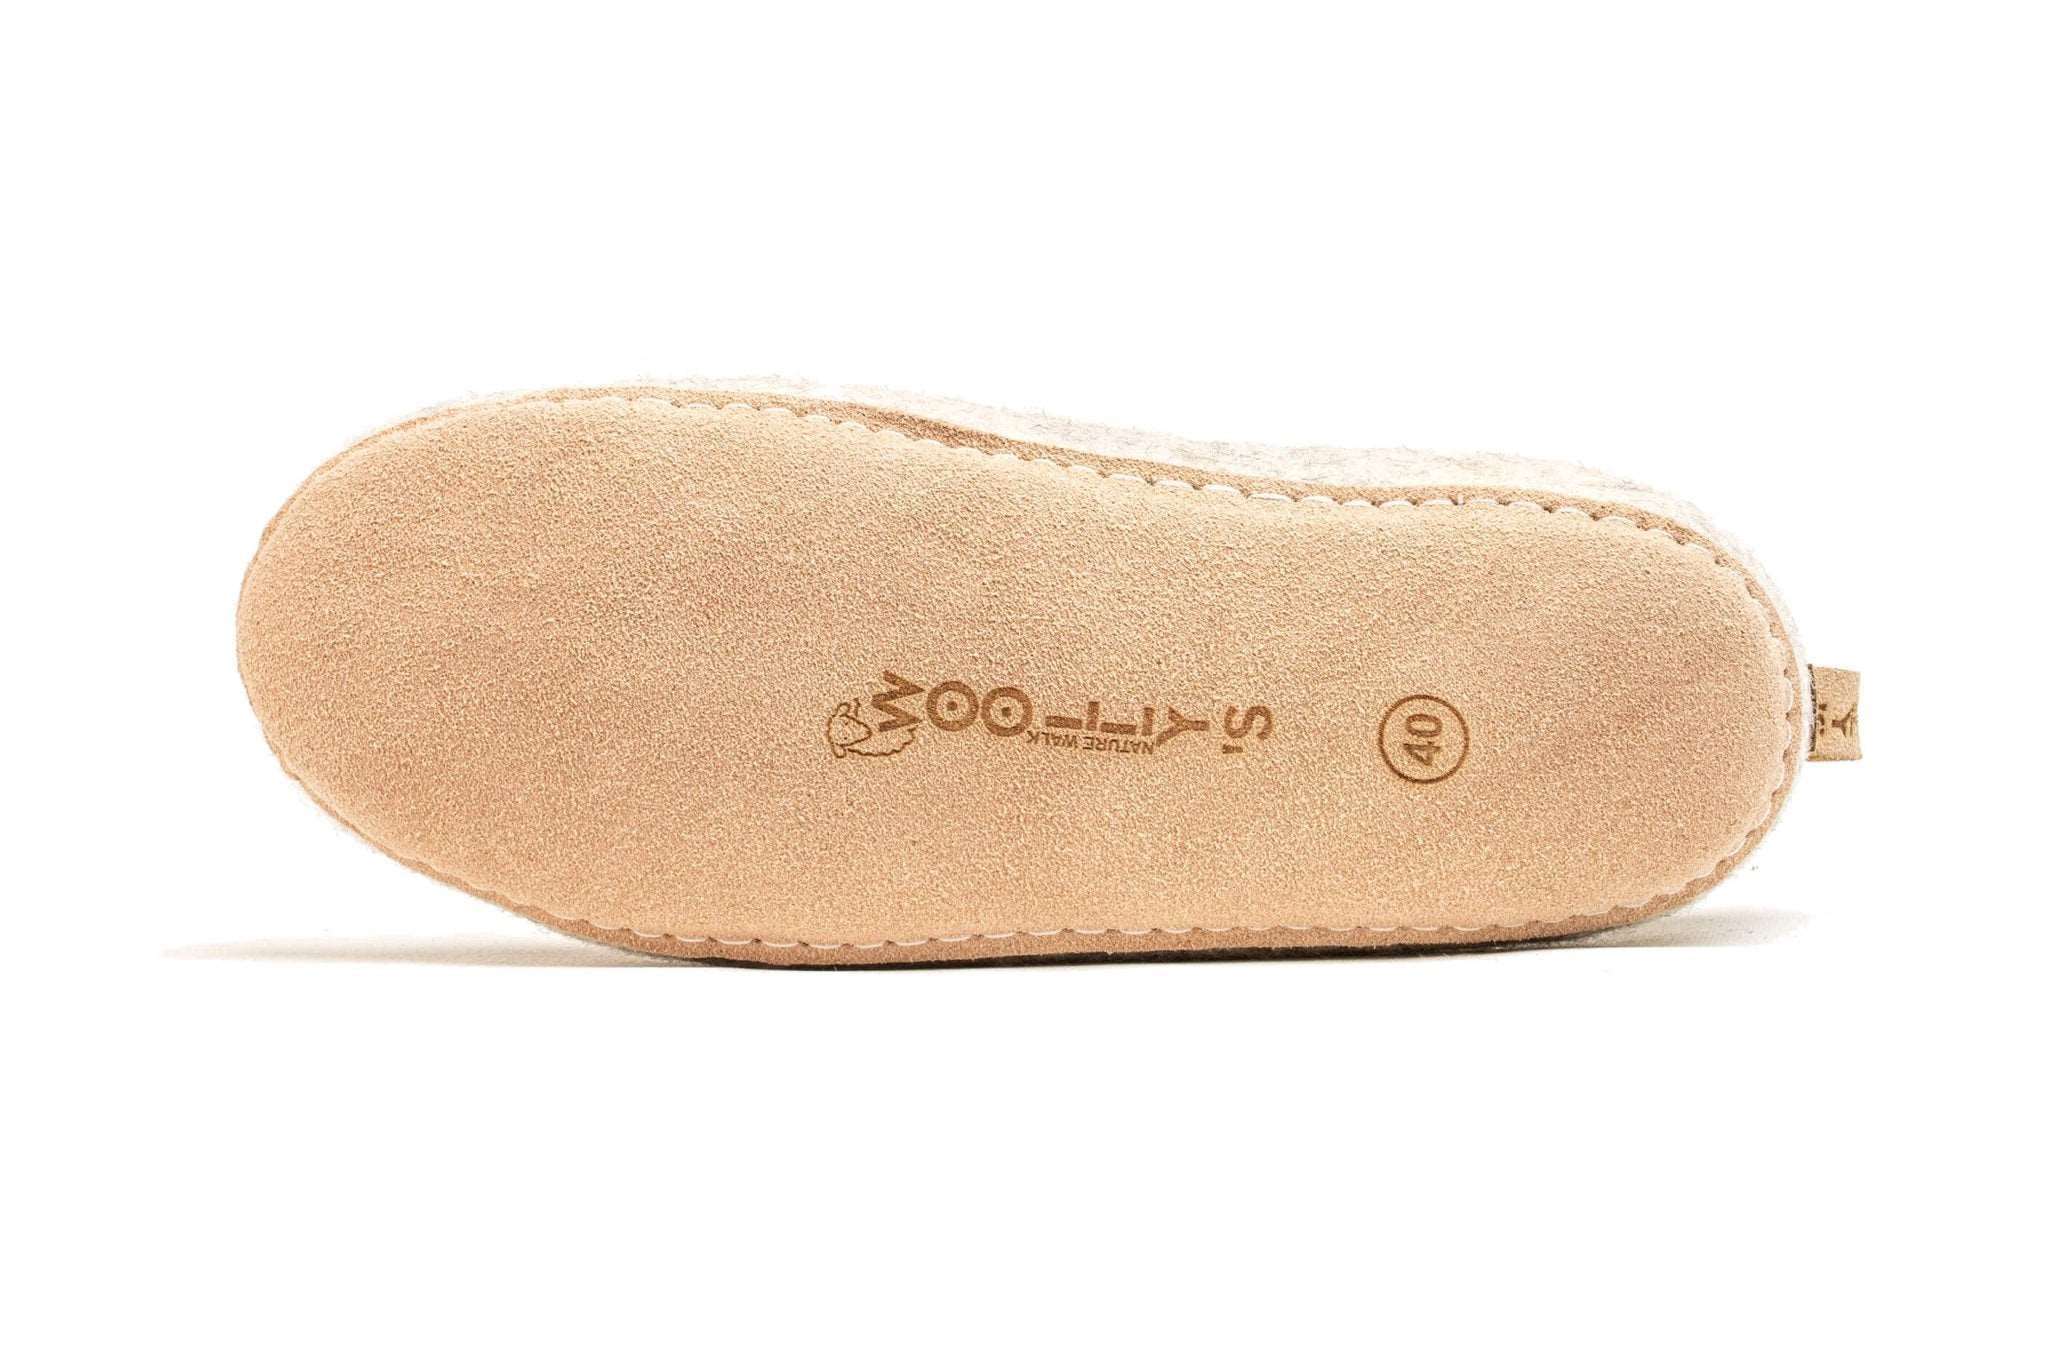 Indoor Shoes With Leather Sole - Light Brown - Woollyes